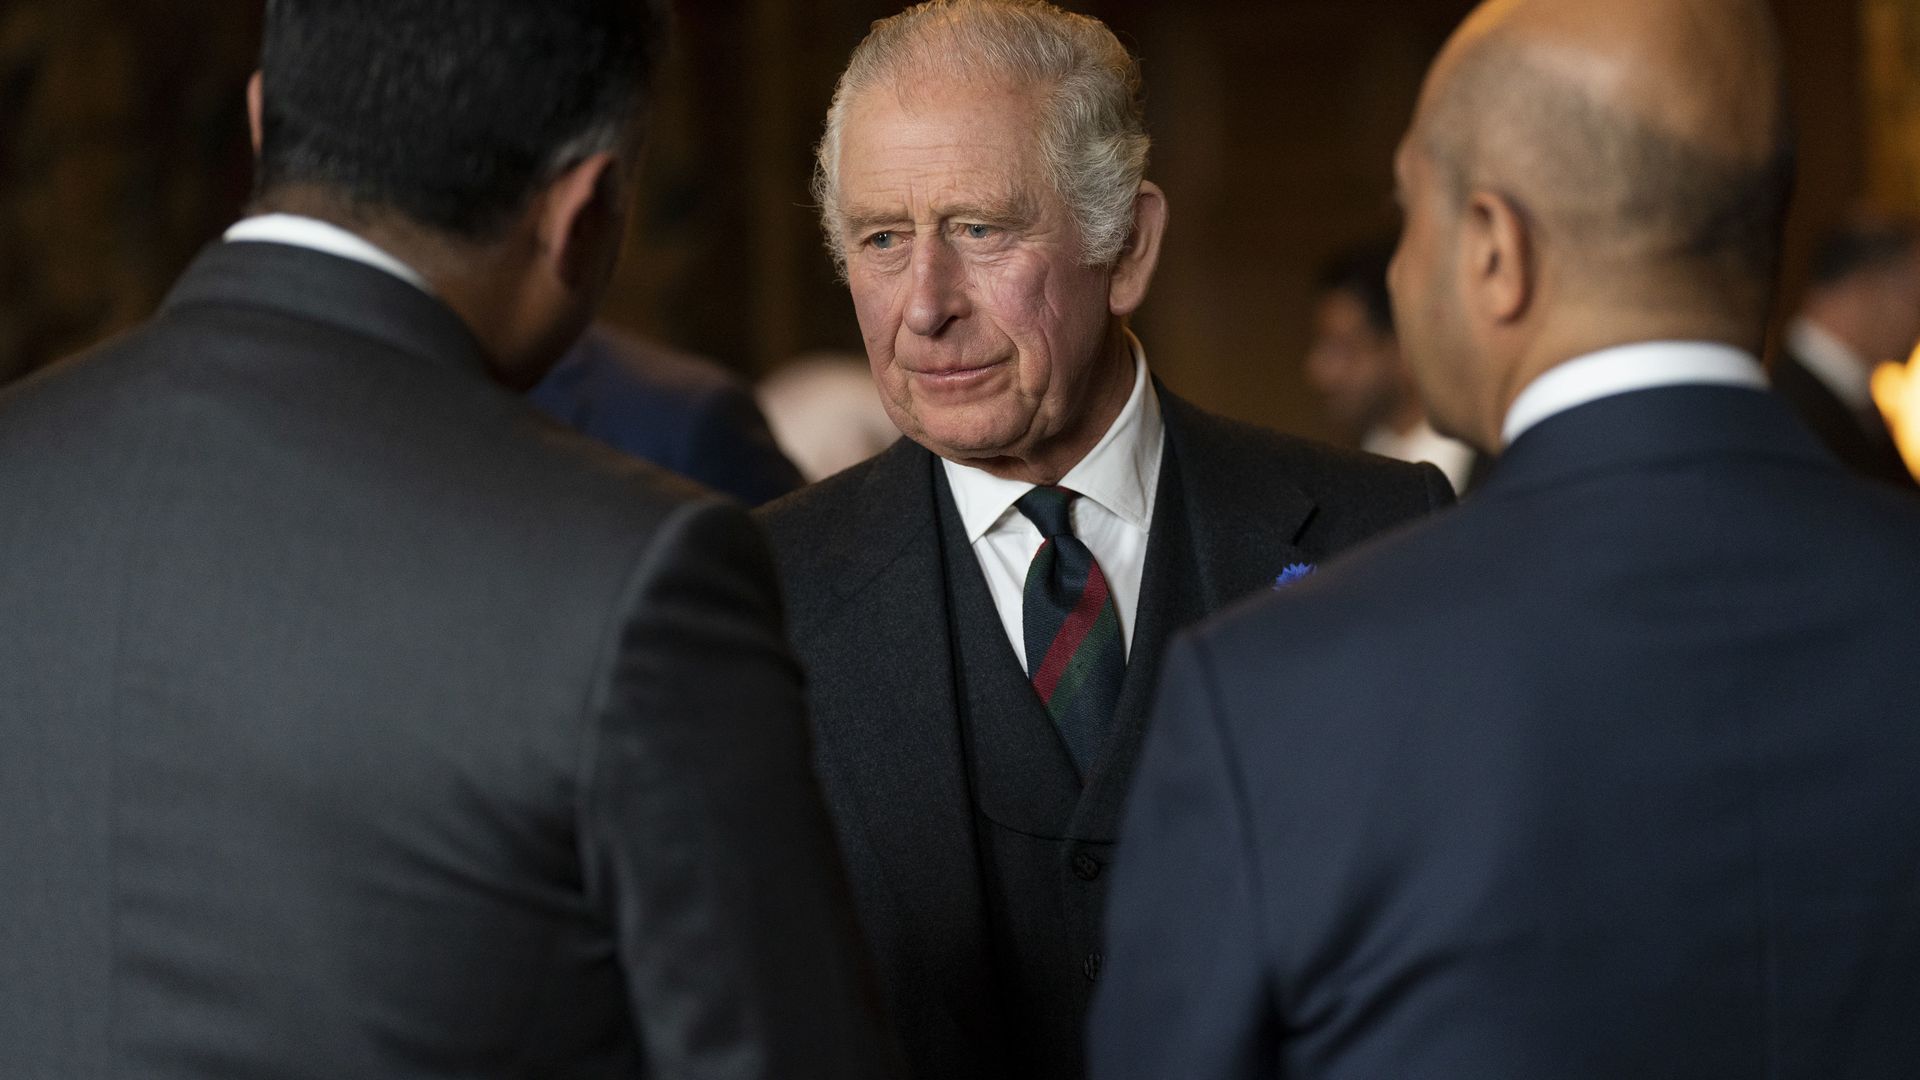 ing Charles III hosts a reception to celebrate British South Asian communities.